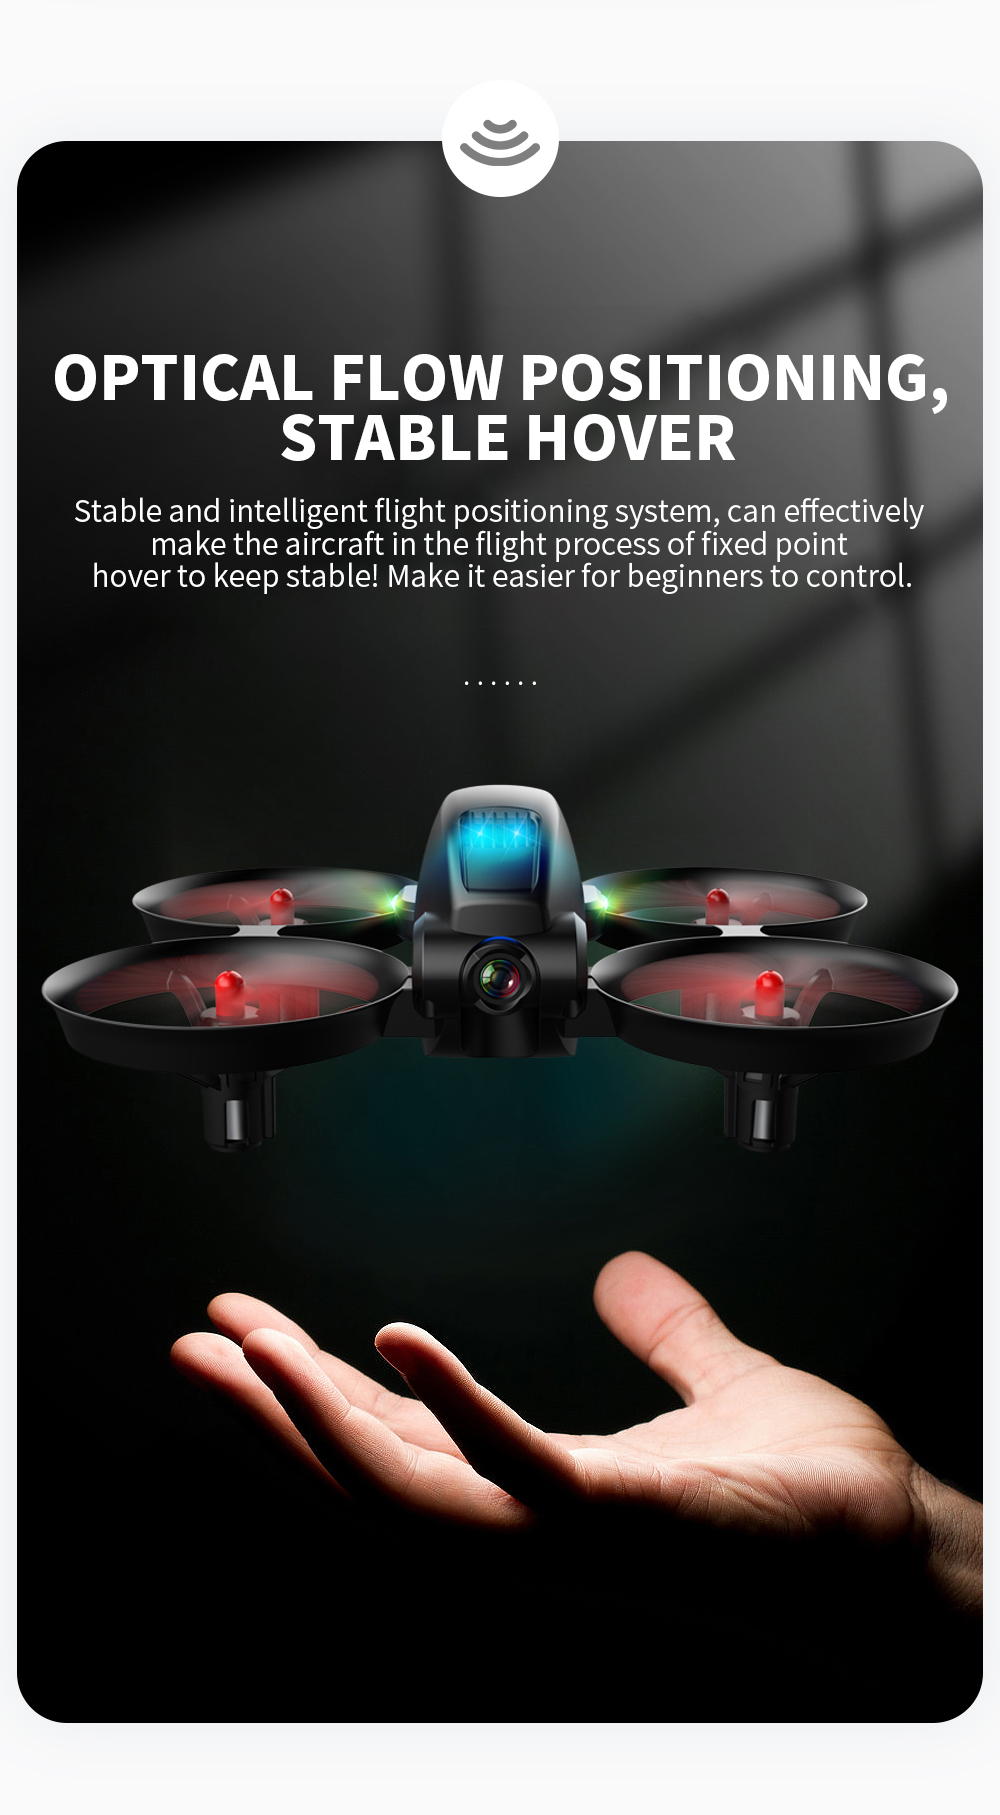 KF615-WIFI-FPV-with-4K-Dual-Camera-Optical-Flow-Positioning-Headless-Mode-Gyro-self-stabilization-RC-1882626-12